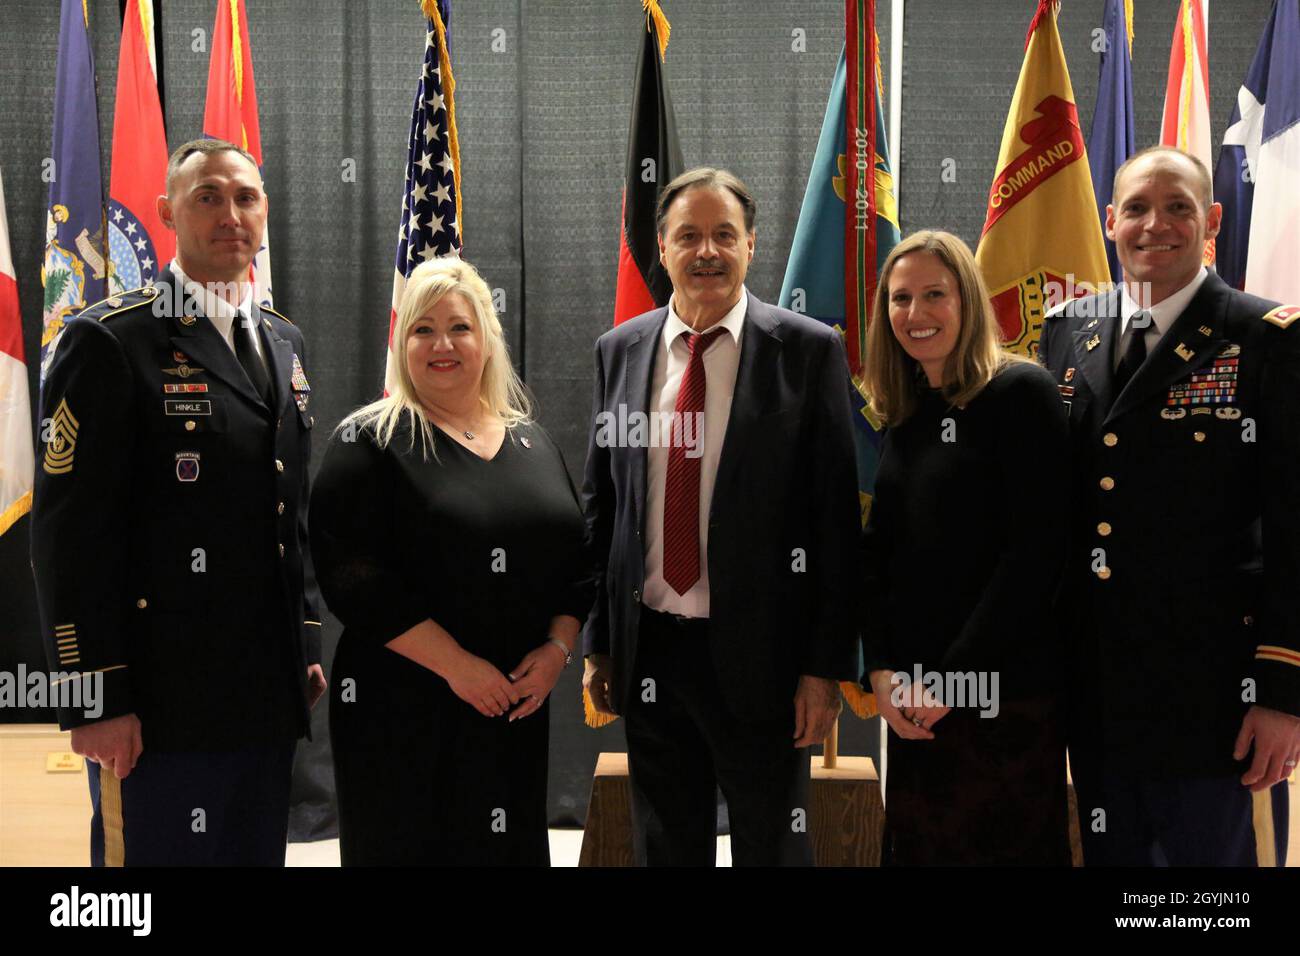 (Left to right) Command Sgt. Maj. and Mrs. Hinkle, Velburg Mayor Bernhard Kraus and Lt. Col. and Mrs Krueger at the Hohenfels Military Community New Year’s reception. Stock Photo